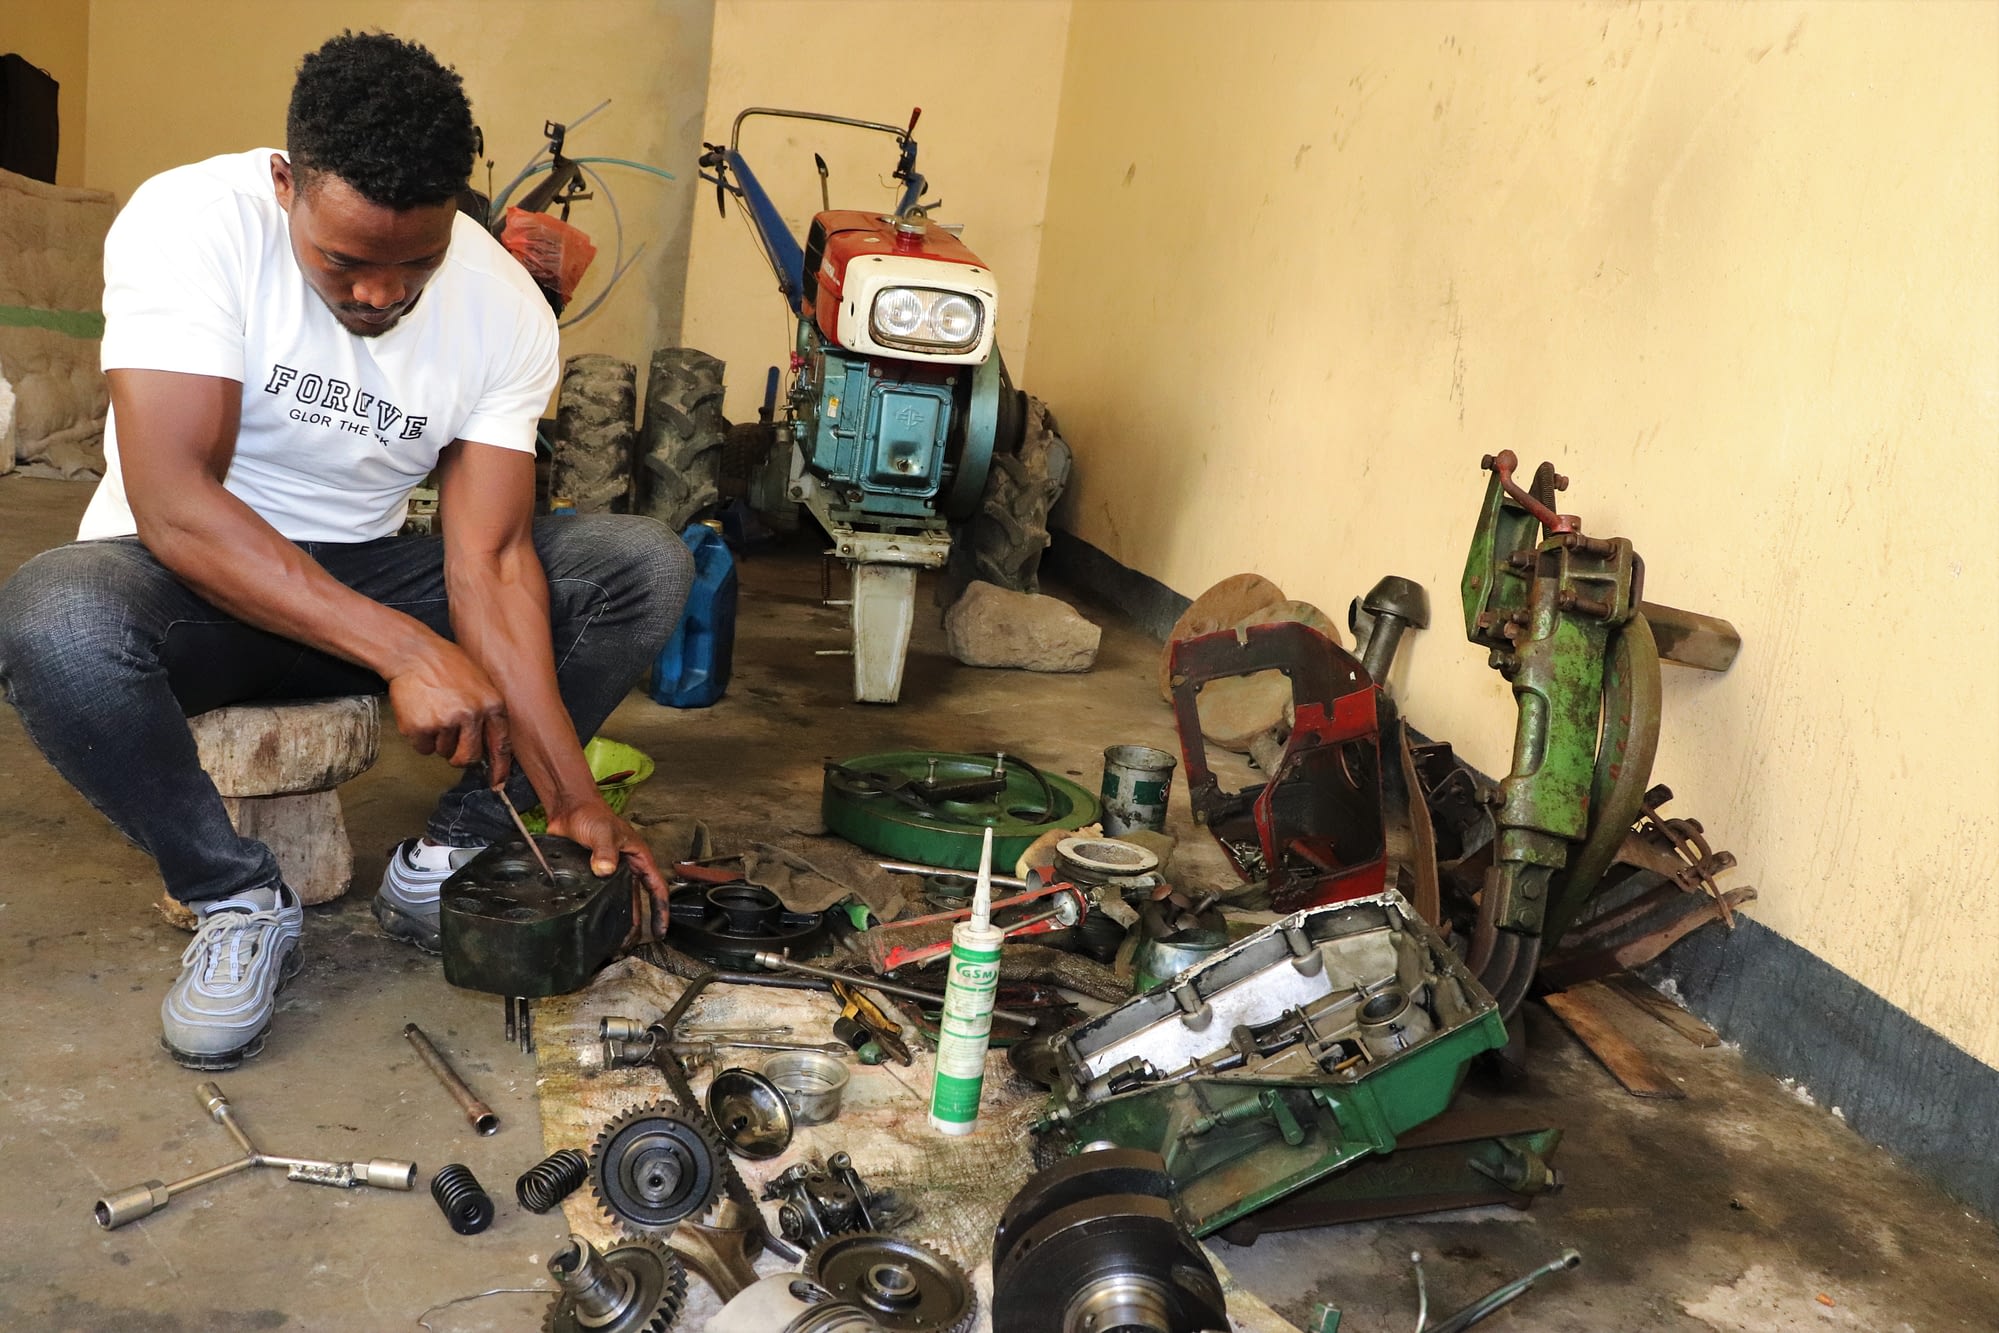 Beyene Chufamo (28) is a two-wheel tractor technology service provider based in Meki, Ethiopia. In 2016, with the support of CIMMYT, he started providing repair and maintenance services to service providers in different areas. (Photo: Ephrem Tadesse/CIMMYT)